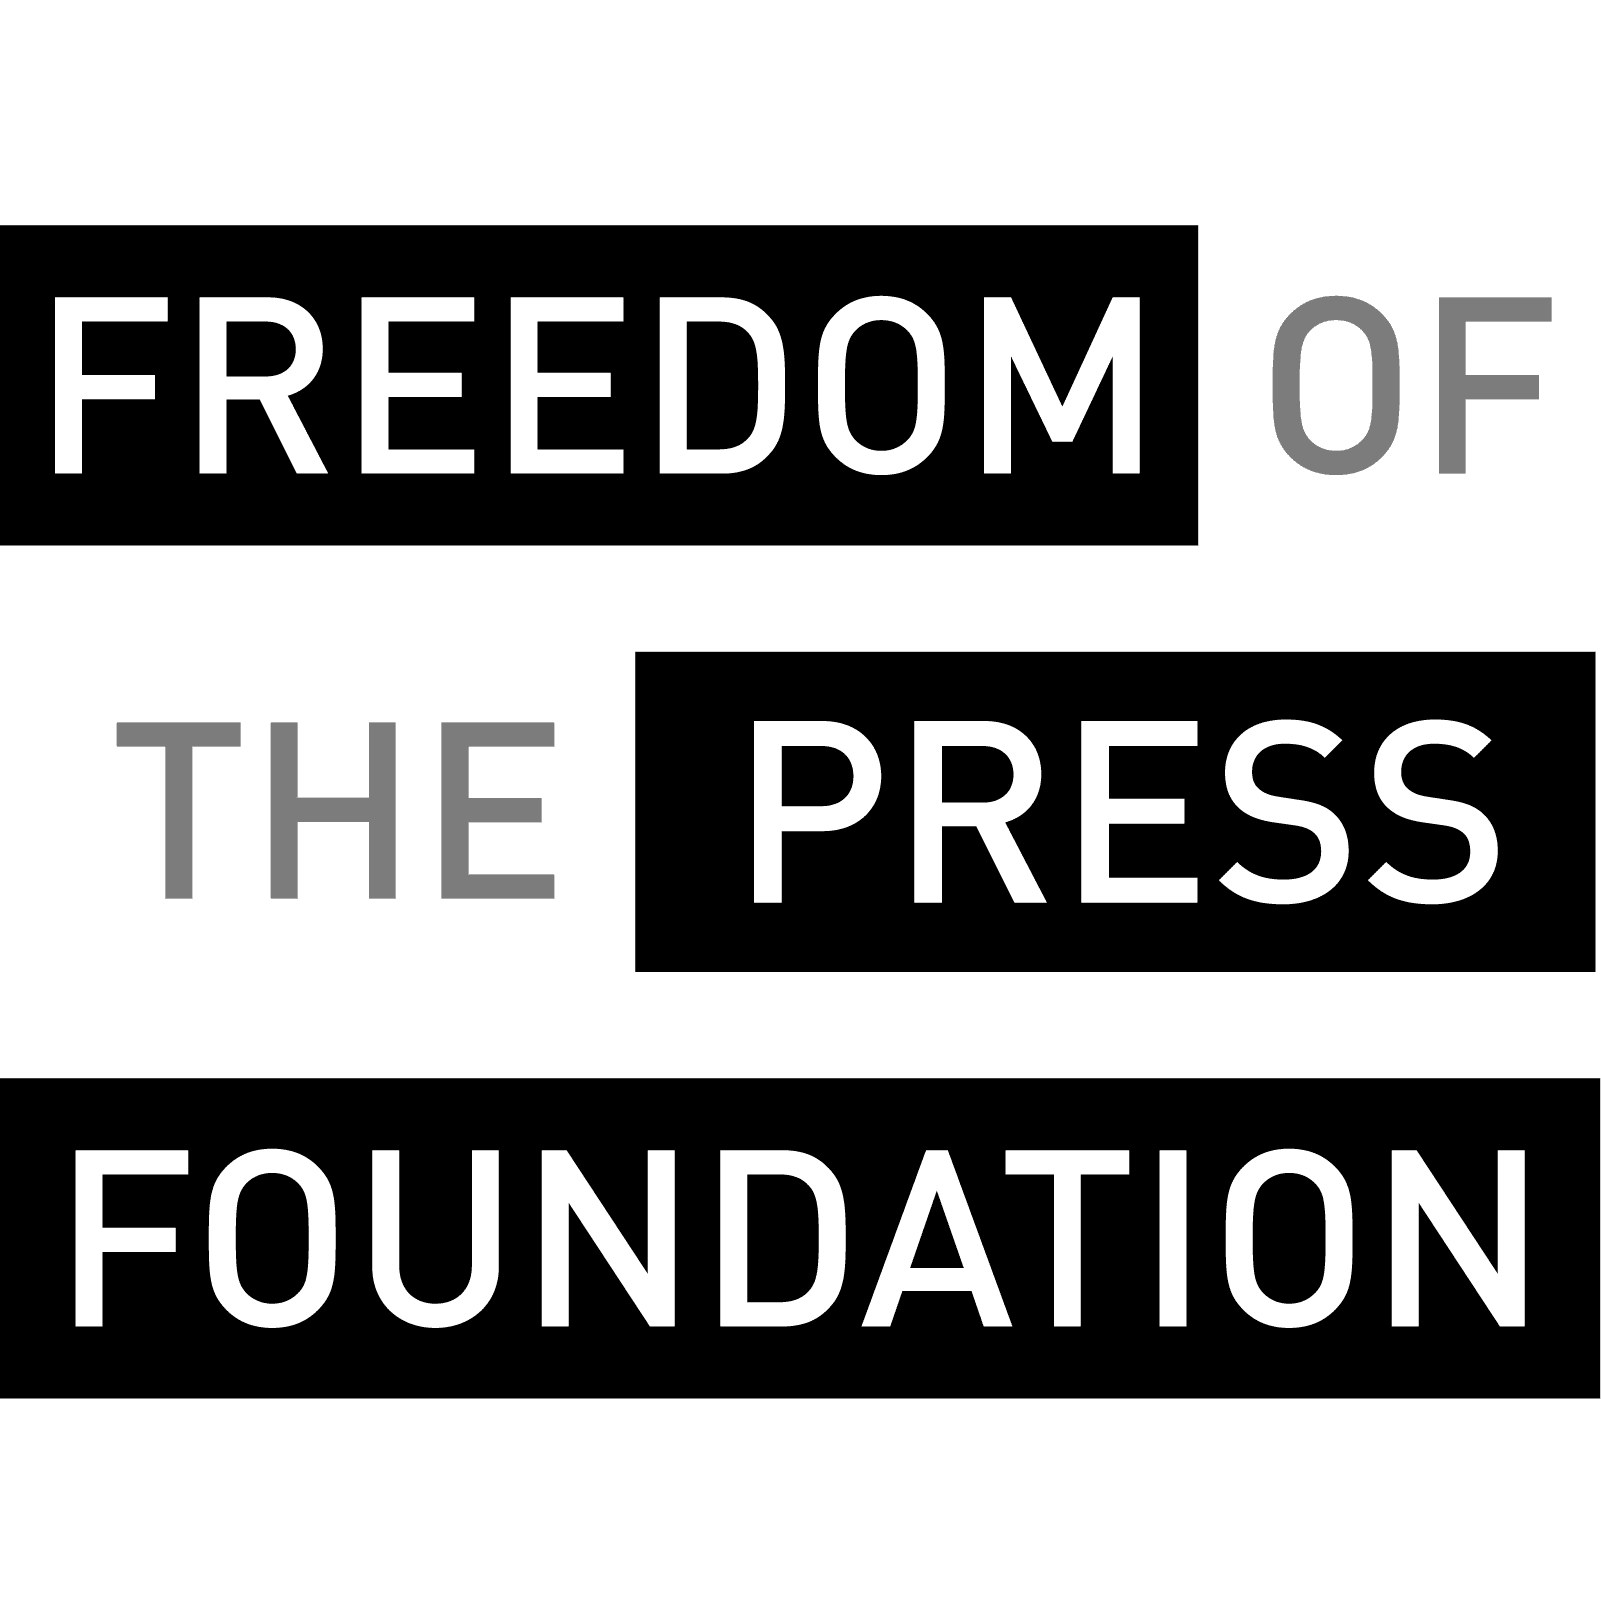 Freedom of the Press Foundation